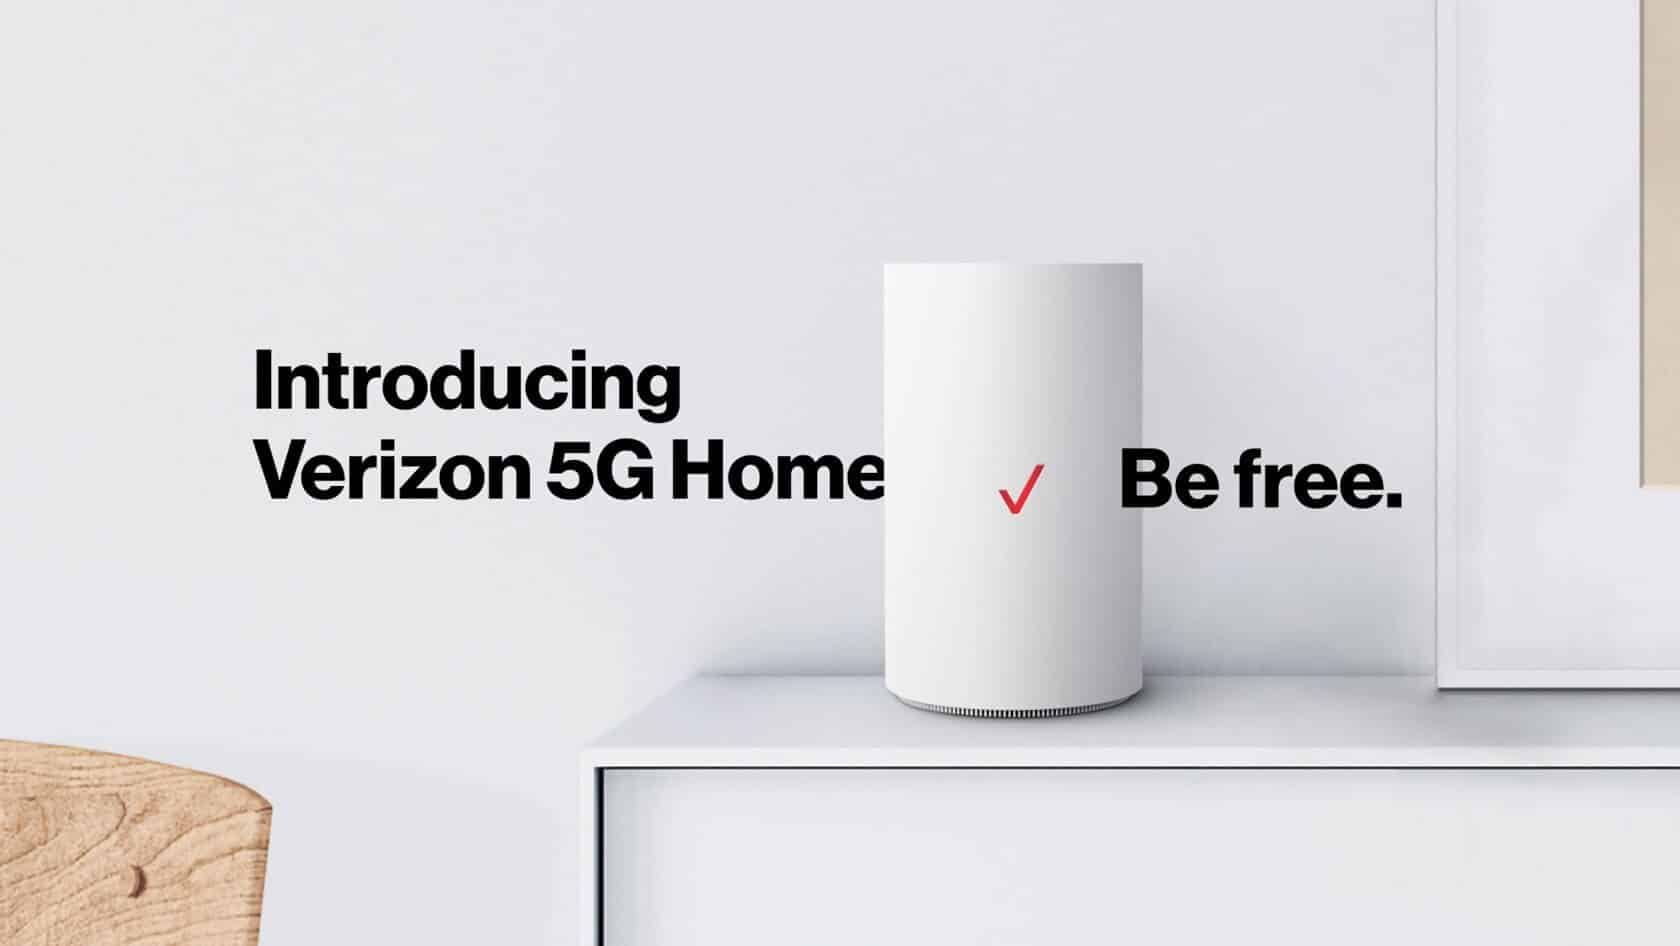 Verizon delays its '5G Home' Wi-Fi service rollout to the second half of 2020 1